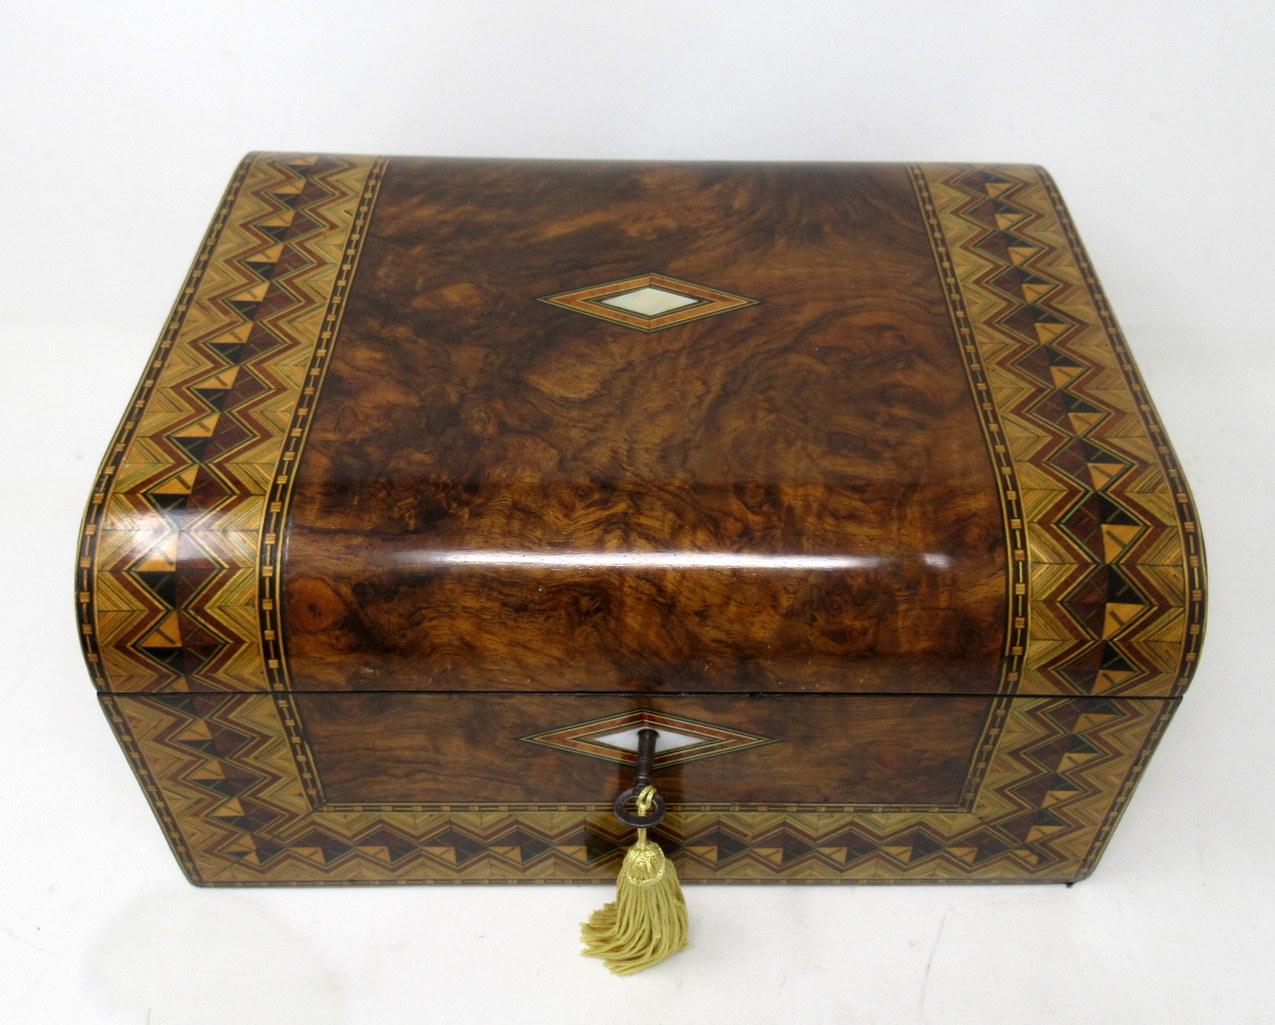 An exceptionally fine quality English tunbridge ware inlaid well figured solid burr walnut ladies or gents travelling writing slope of outstanding quality and compact proportions, Last quarter of the nineteenth century.

The original fitted